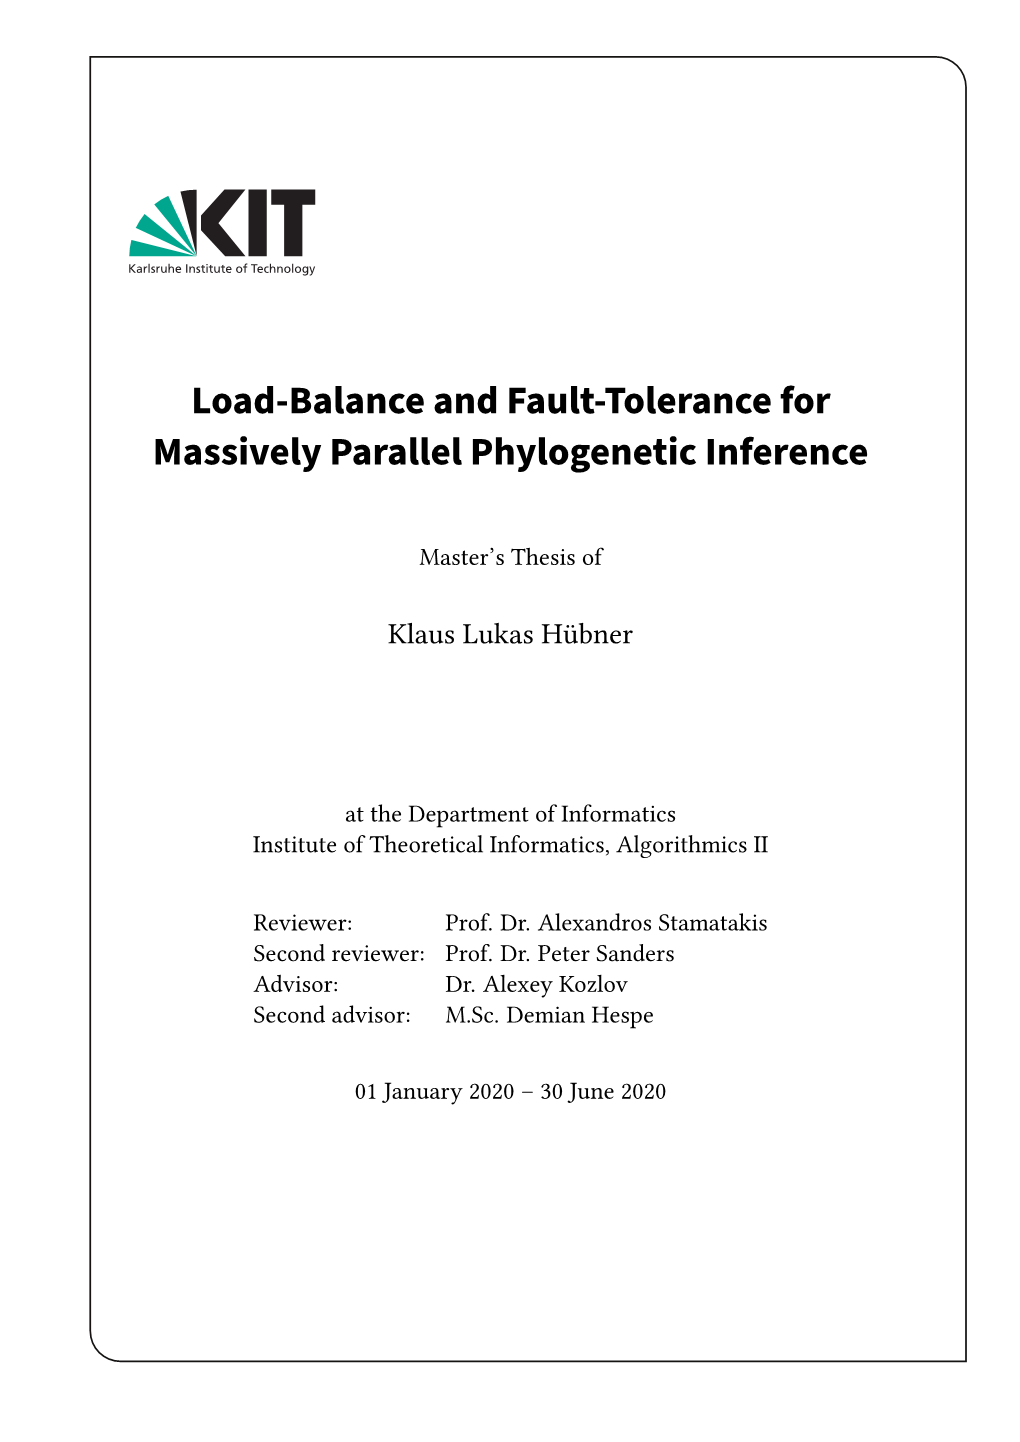 Load-Balance and Fault-Tolerance for Massively Parallel Phylogenetic Inference